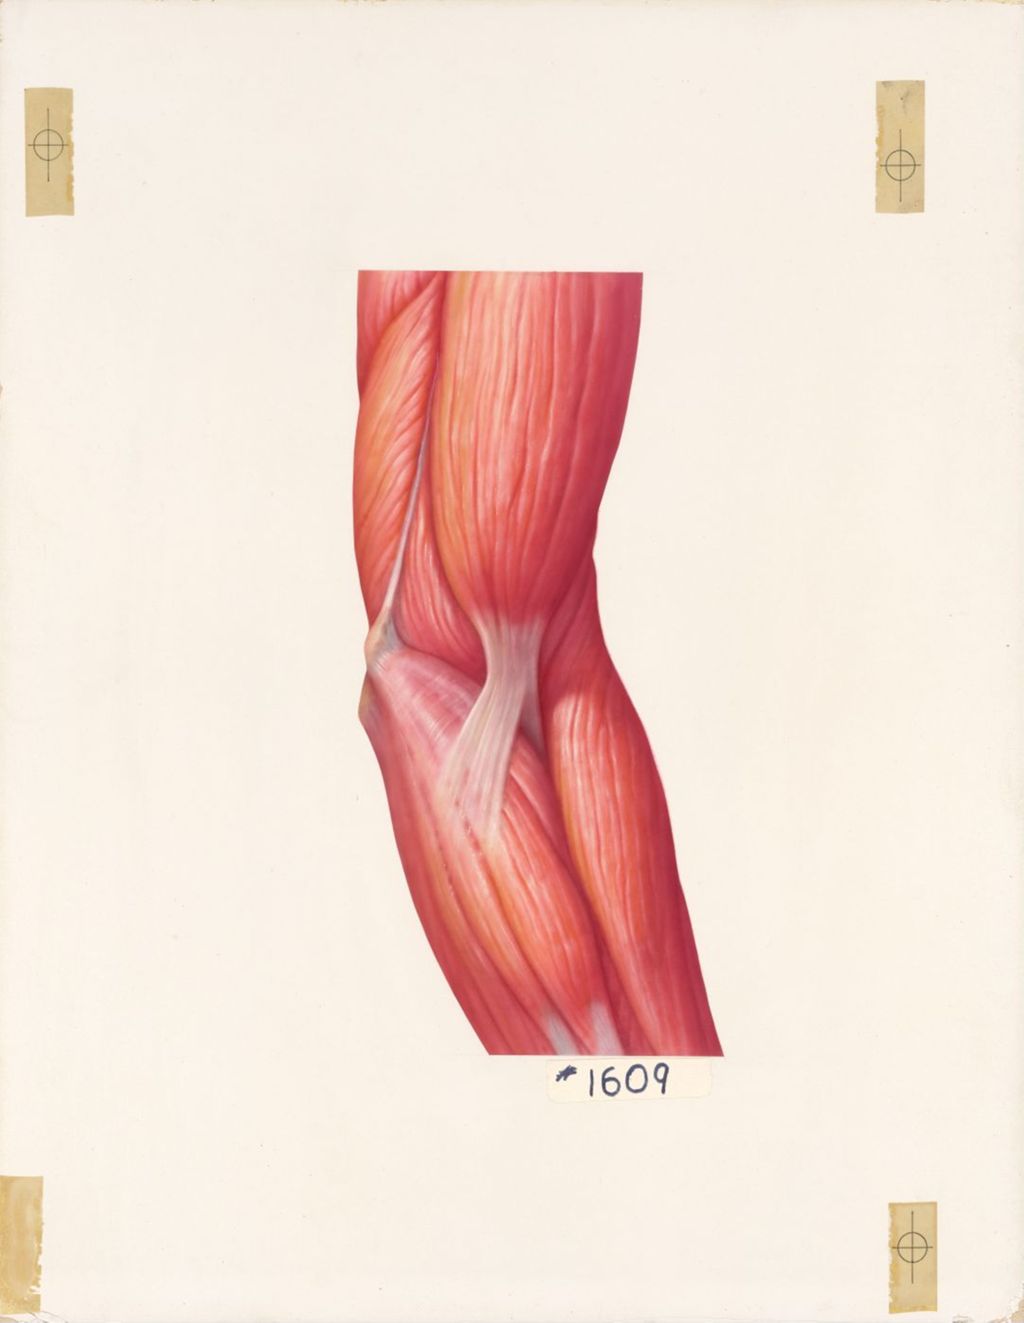 The Elbow, The Musculature of the Elbow, Anteromedial Aspect